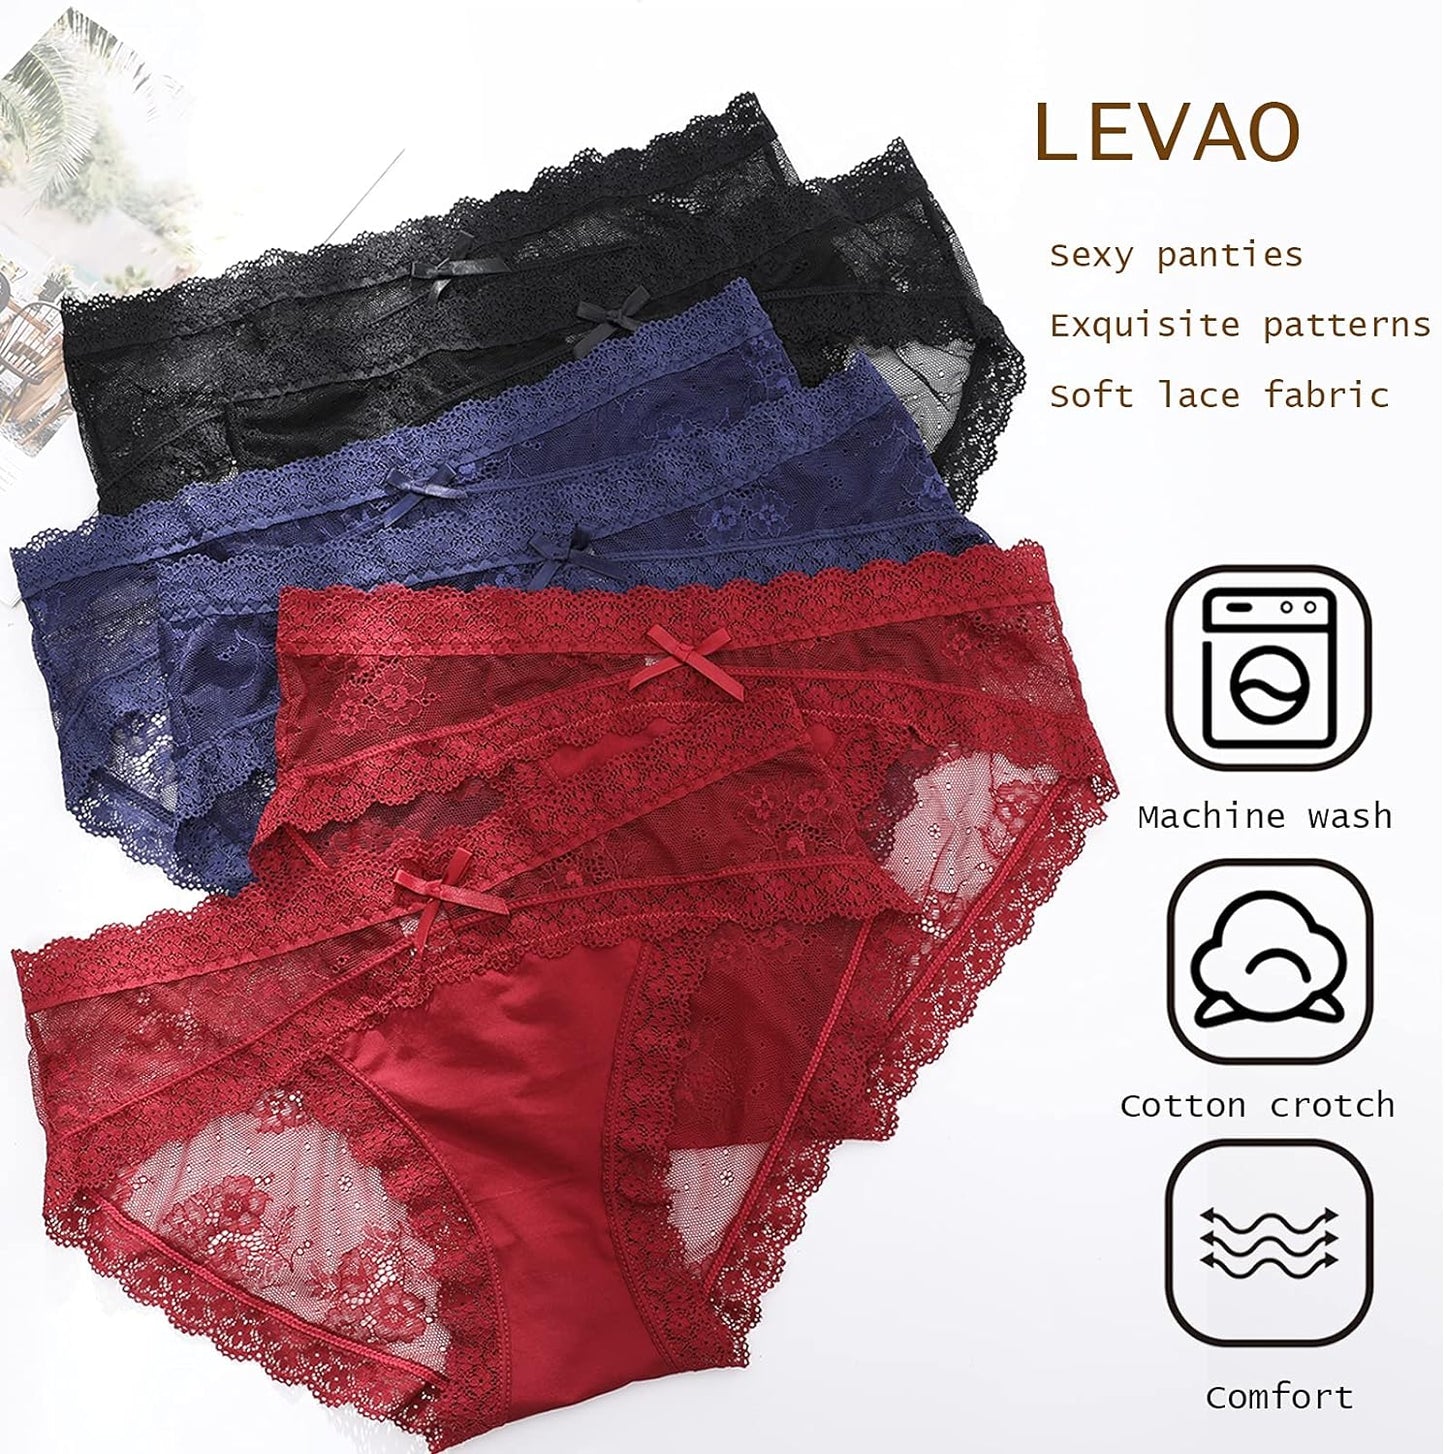 LEVAO Women Lace Underwear Sexy Breathable Hipster Panties Stretch Seamless Bikini Briefs Multipack